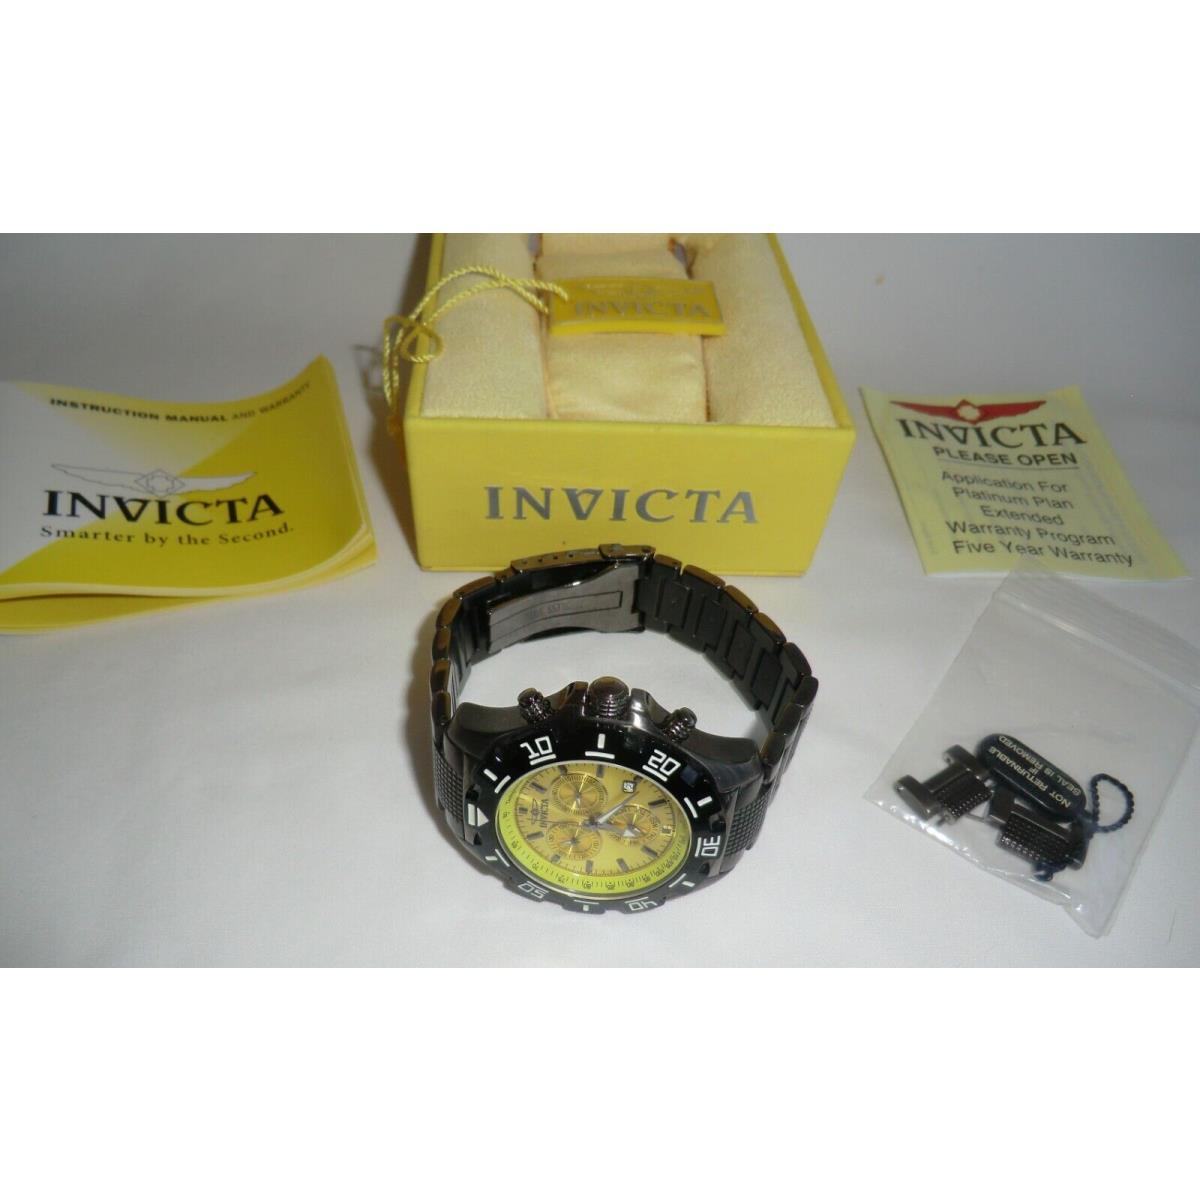 Invicta watch Python Collection - Yellow Dial, Gray Band, Black Bezel